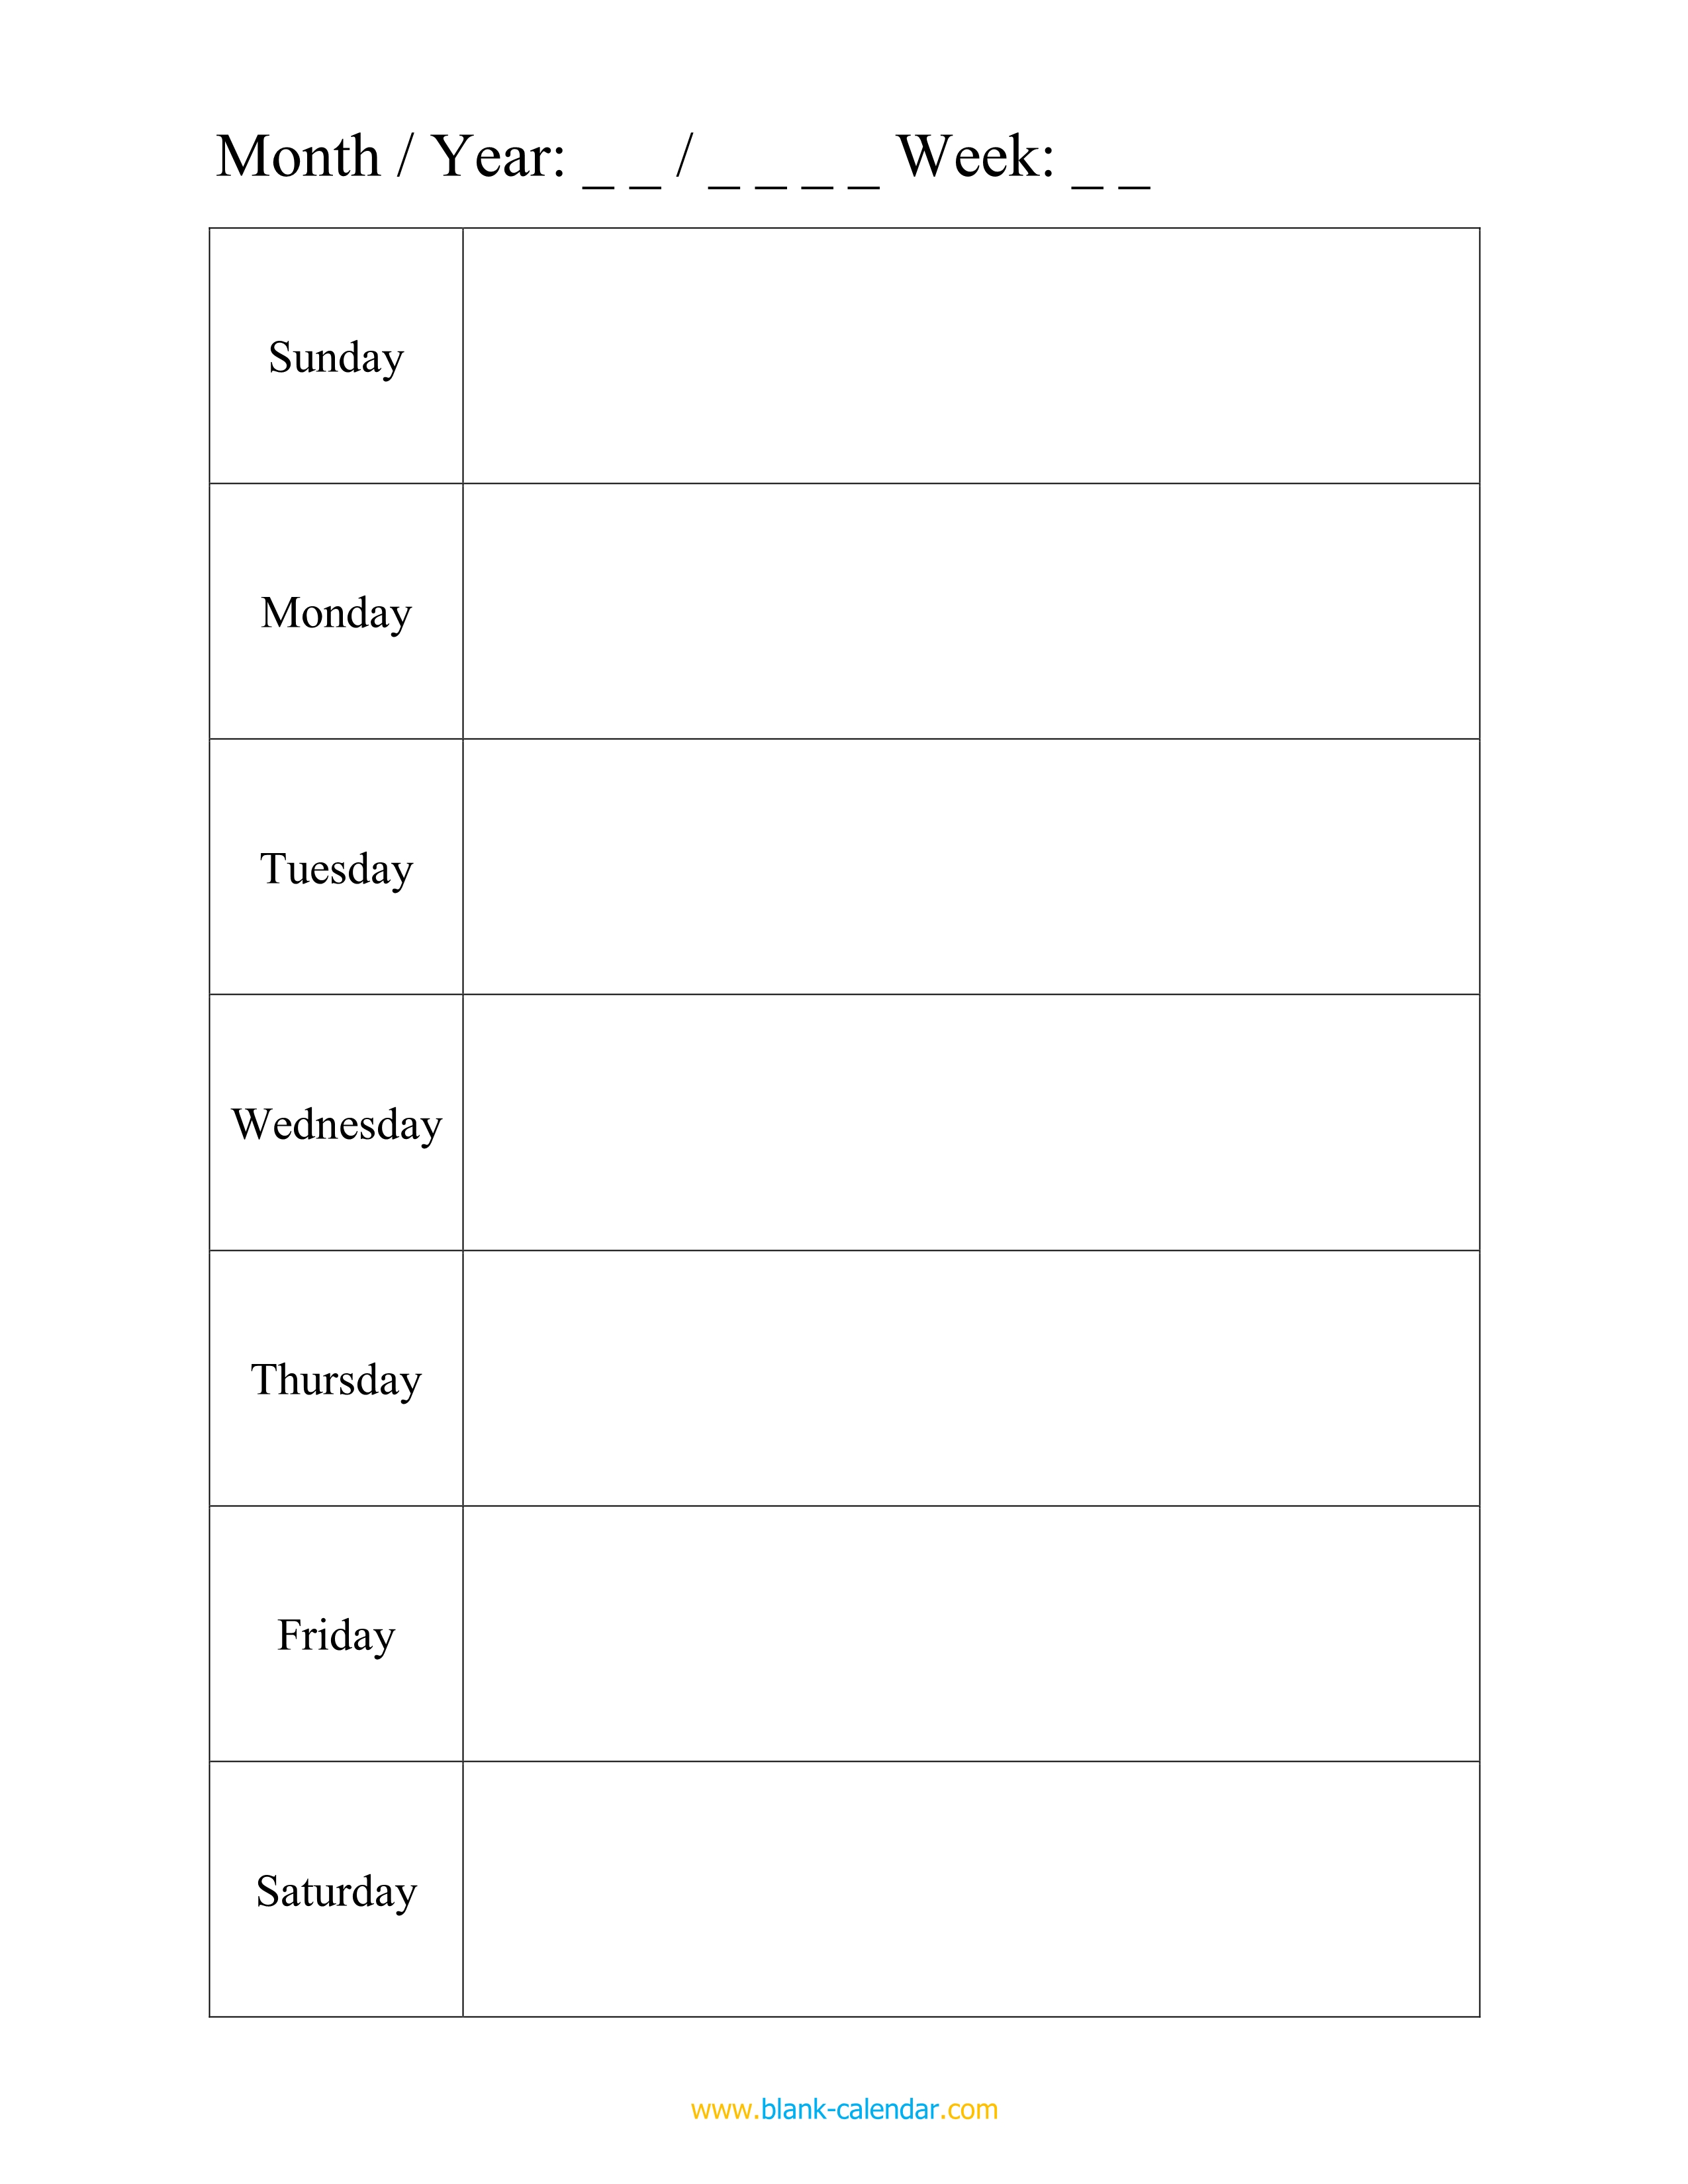 daily schedule pdf template medical office